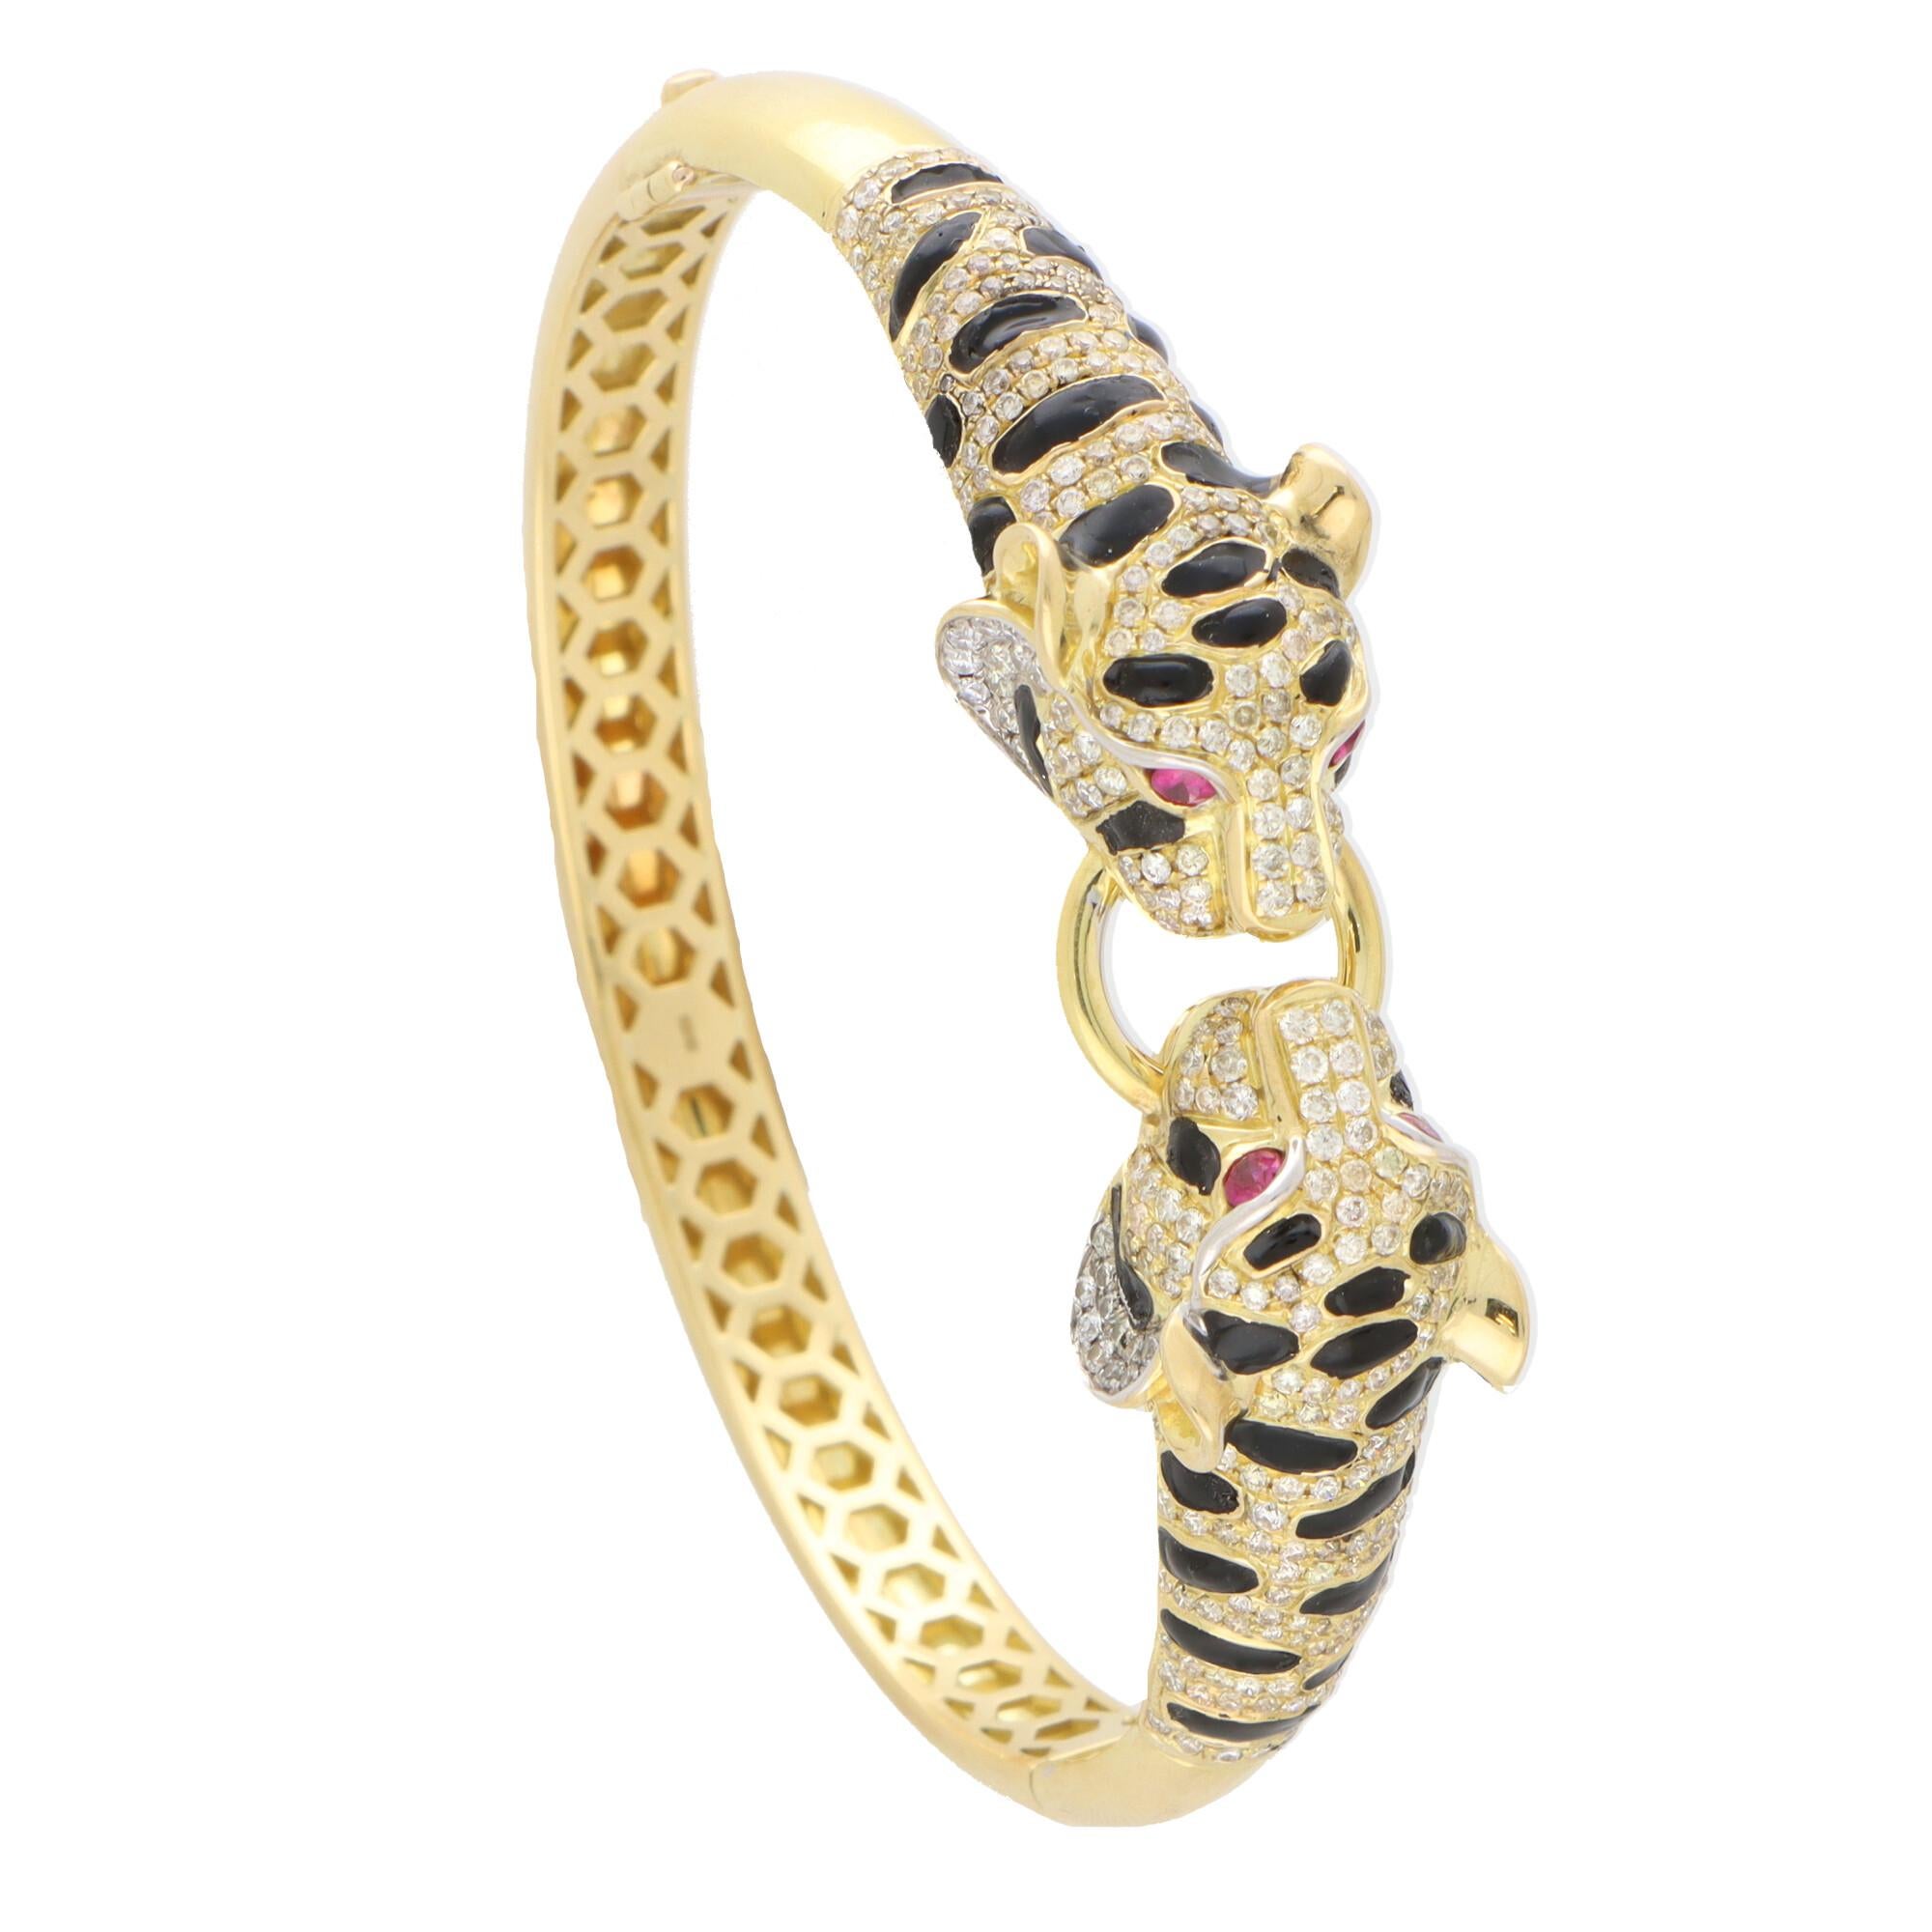 Round Cut Diamond, Ruby and Enamel Double Headed Tiger Hinged Bangle in 18k Yellow Gold